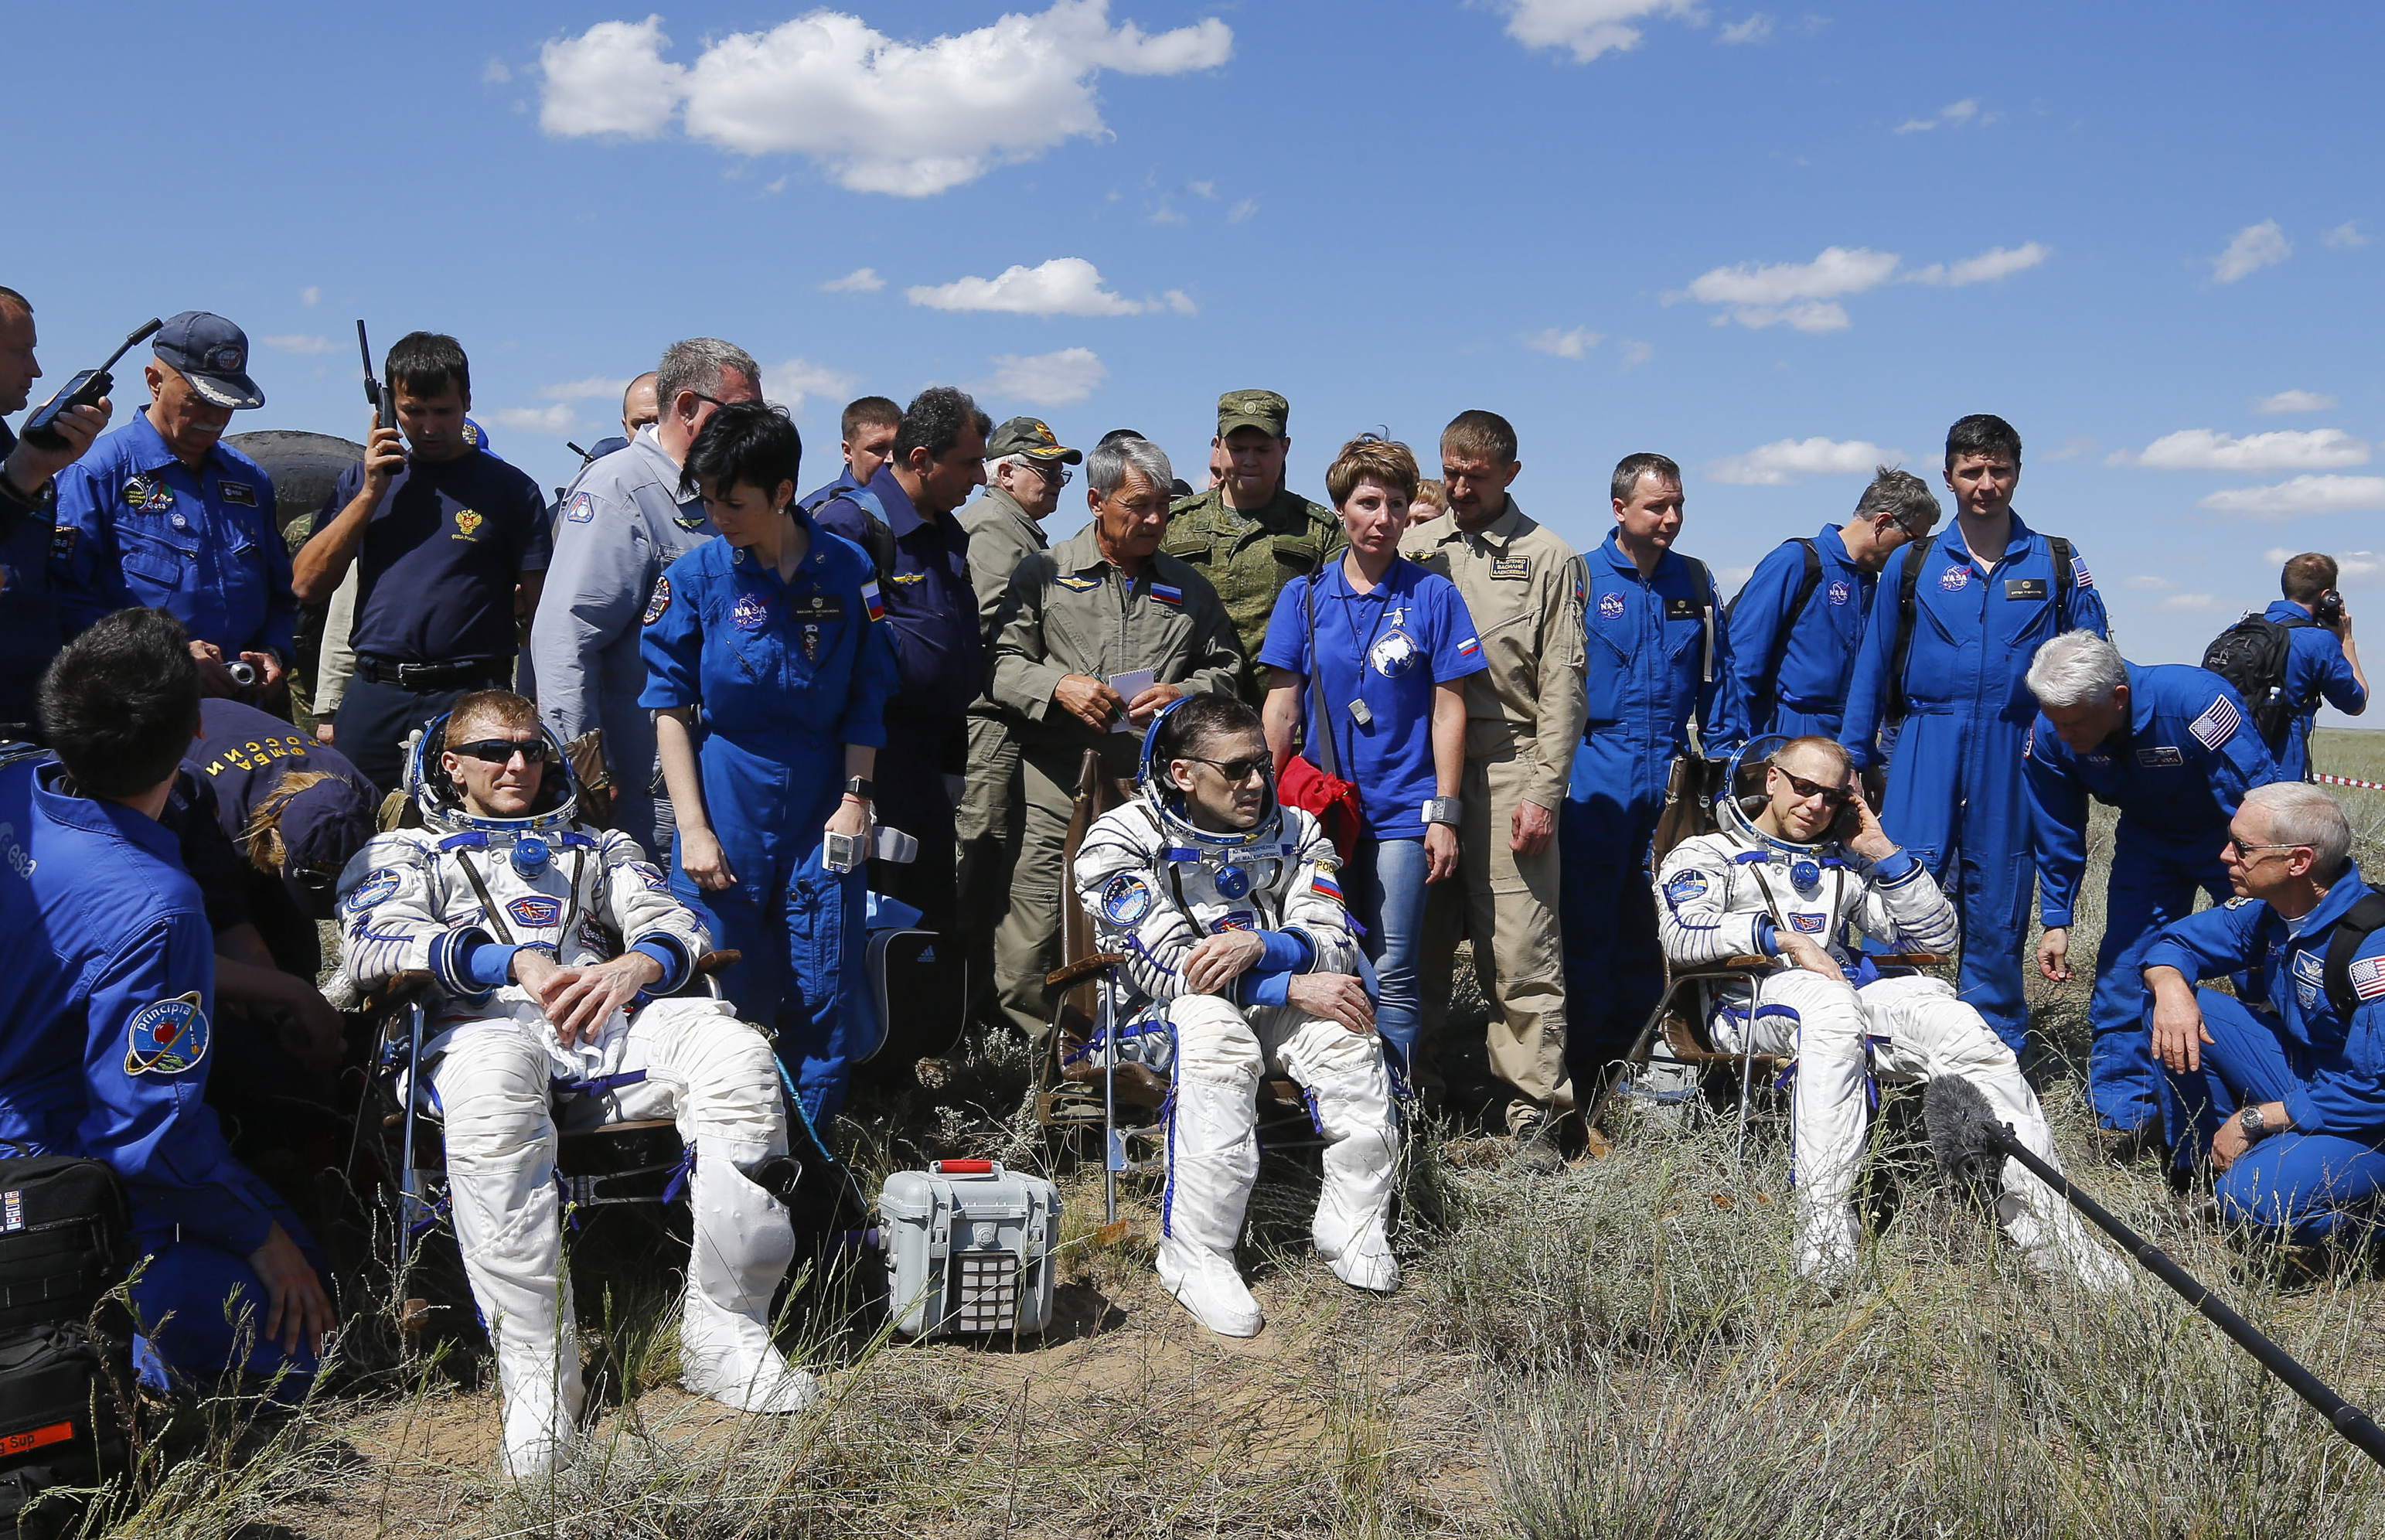 From L: The International Space Station (ISS) crew members Tim Peake of Britain, Yuri Malenchenko of Russia and Tim Kopra of the U.S. rest in chairs shortly after landing near the town of Zhezkazgan, Kazakhstan, on June 18, 2016. / AFP PHOTO / POOL / SHAMIL ZHUMATOV